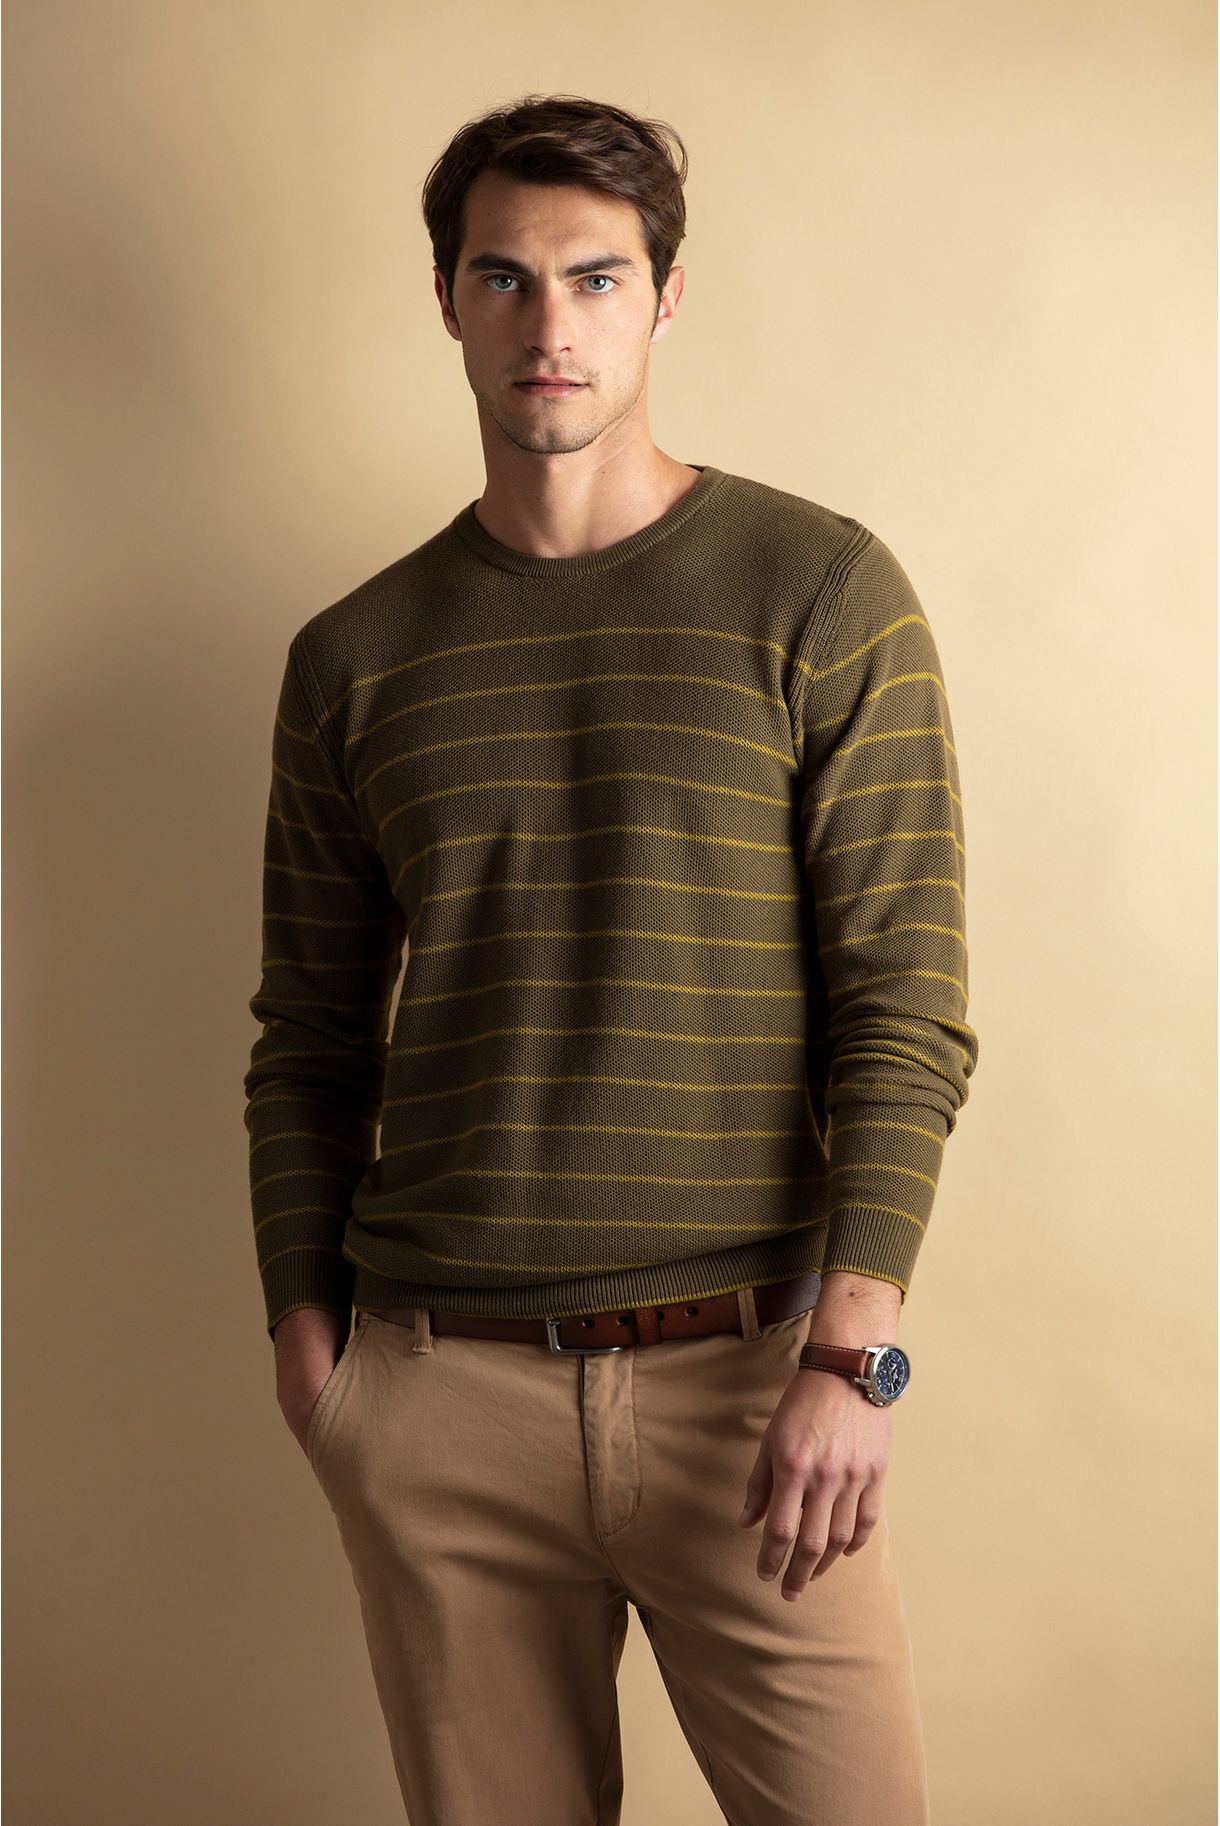 Sweater with striped texture